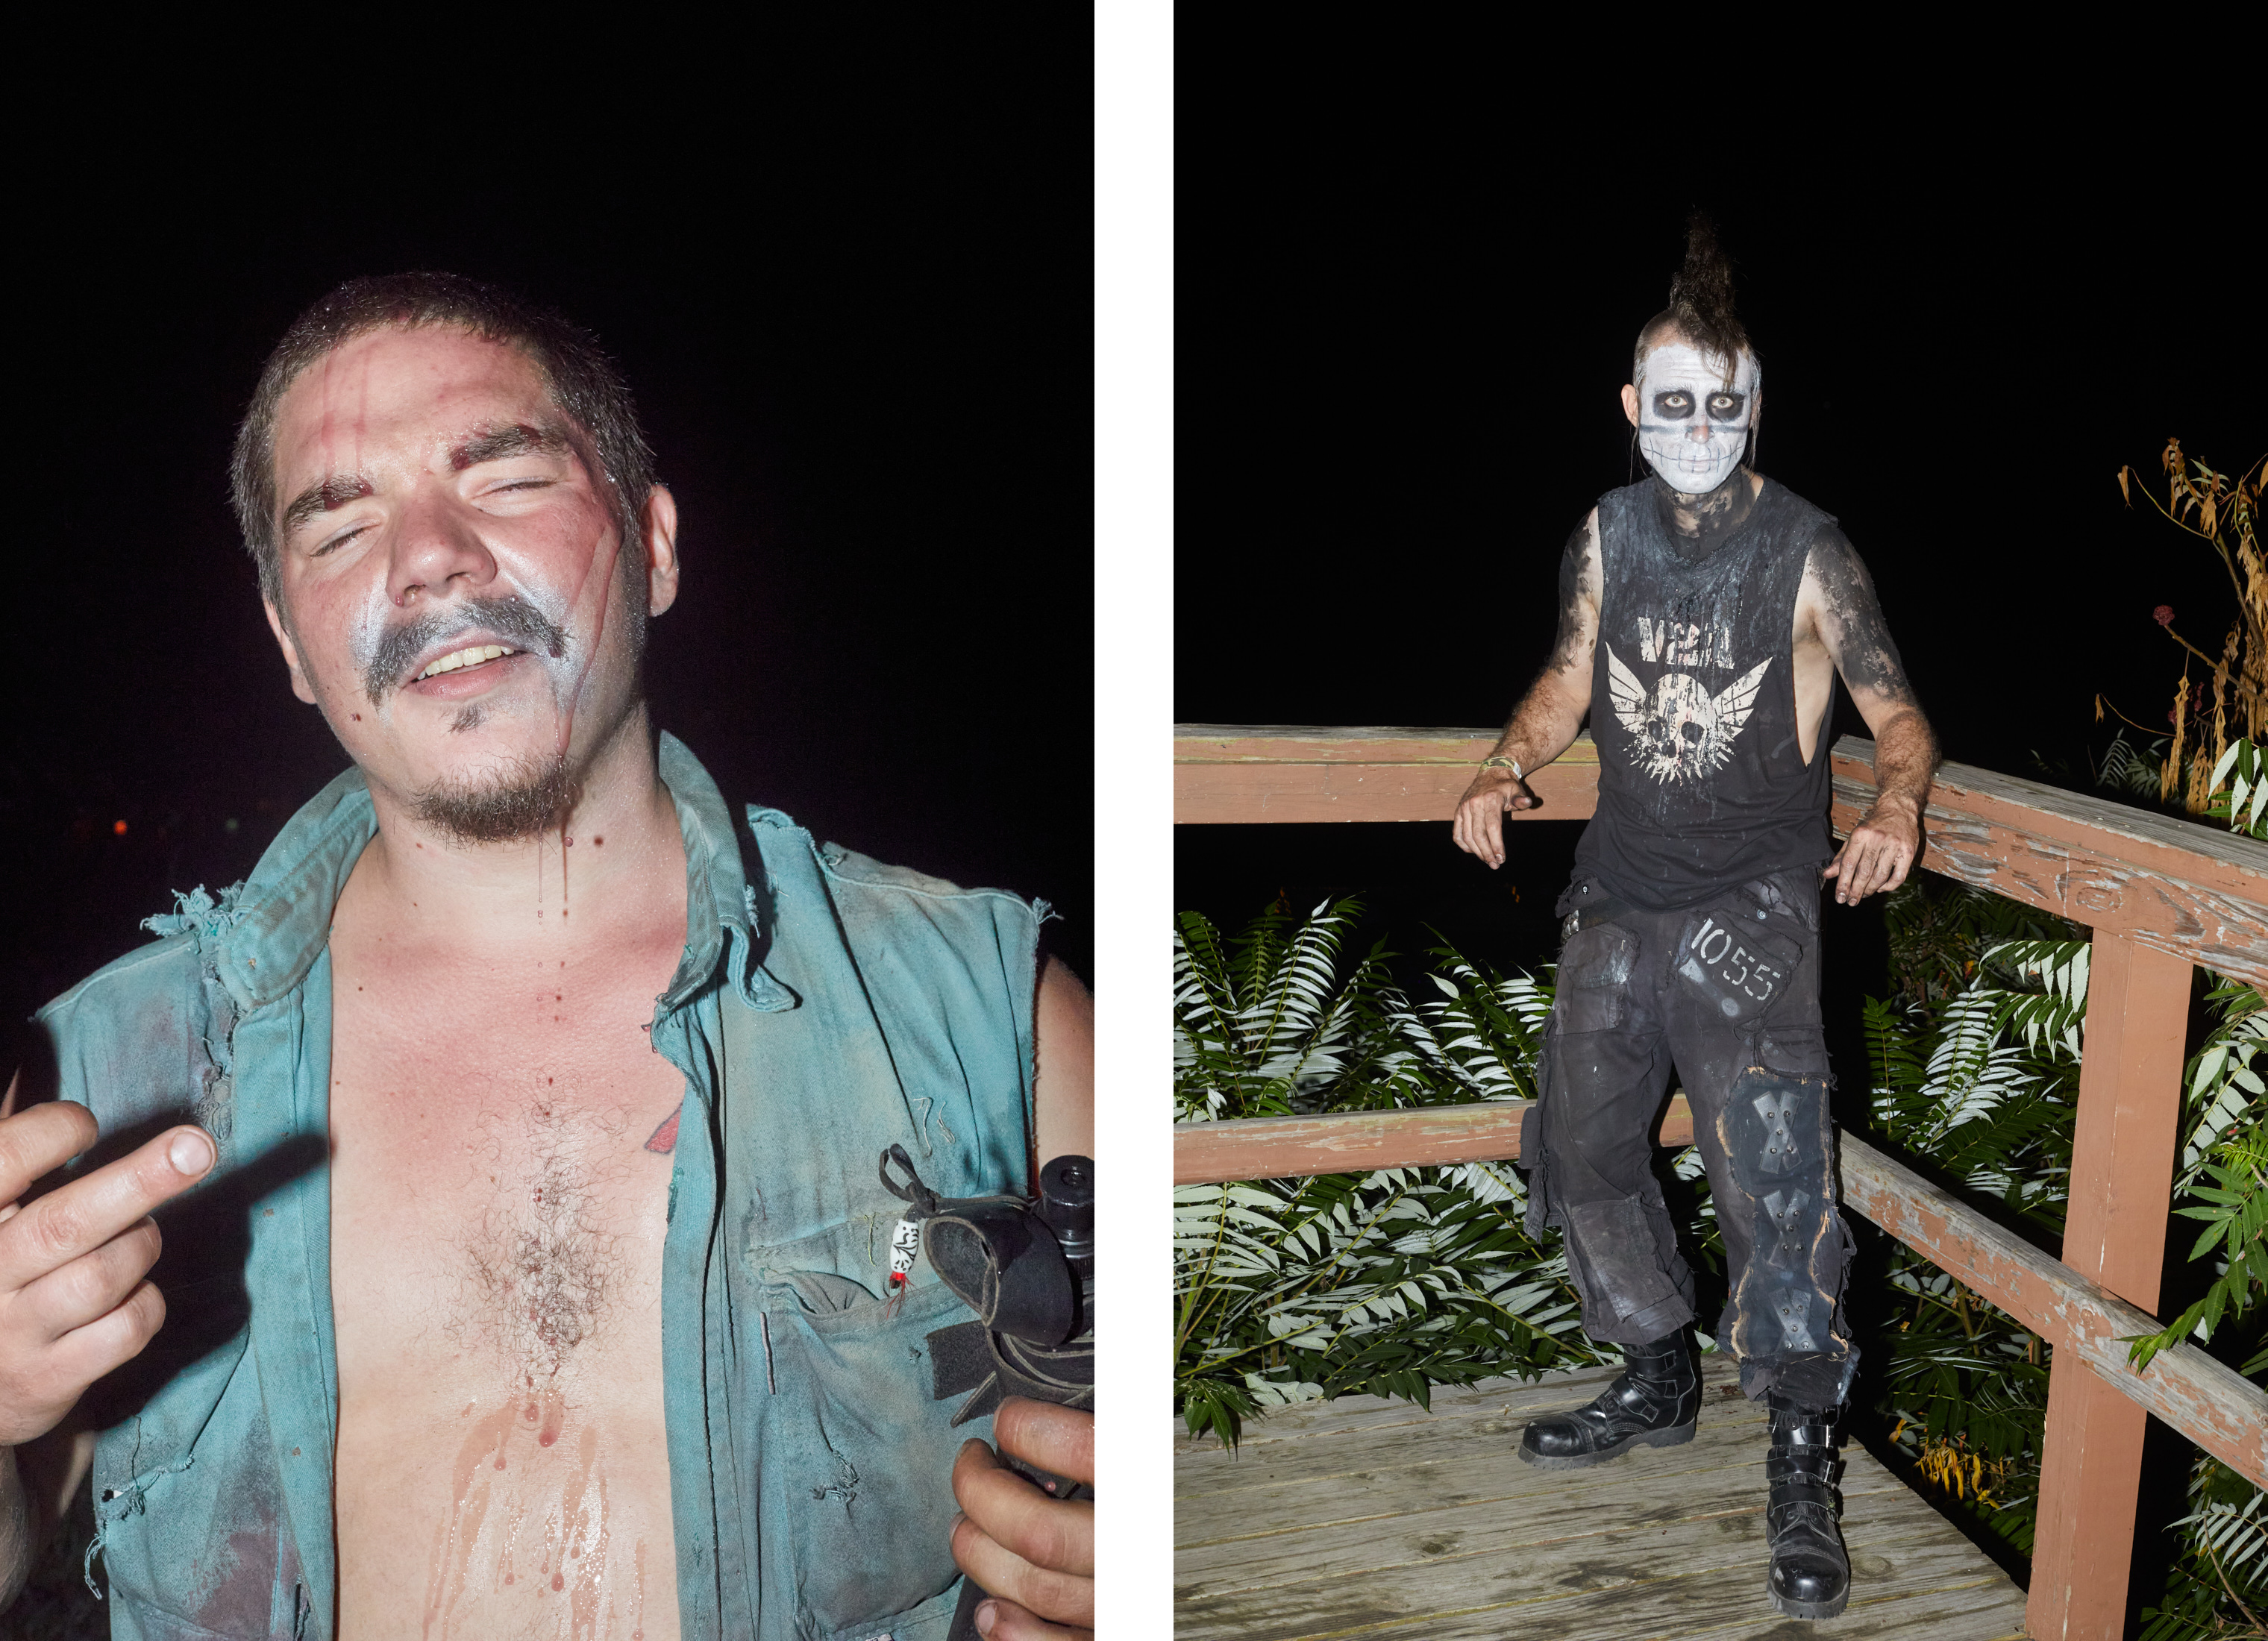 L: A person with chrome paint around their mouth. R: A person with skull face paint poses for the camera